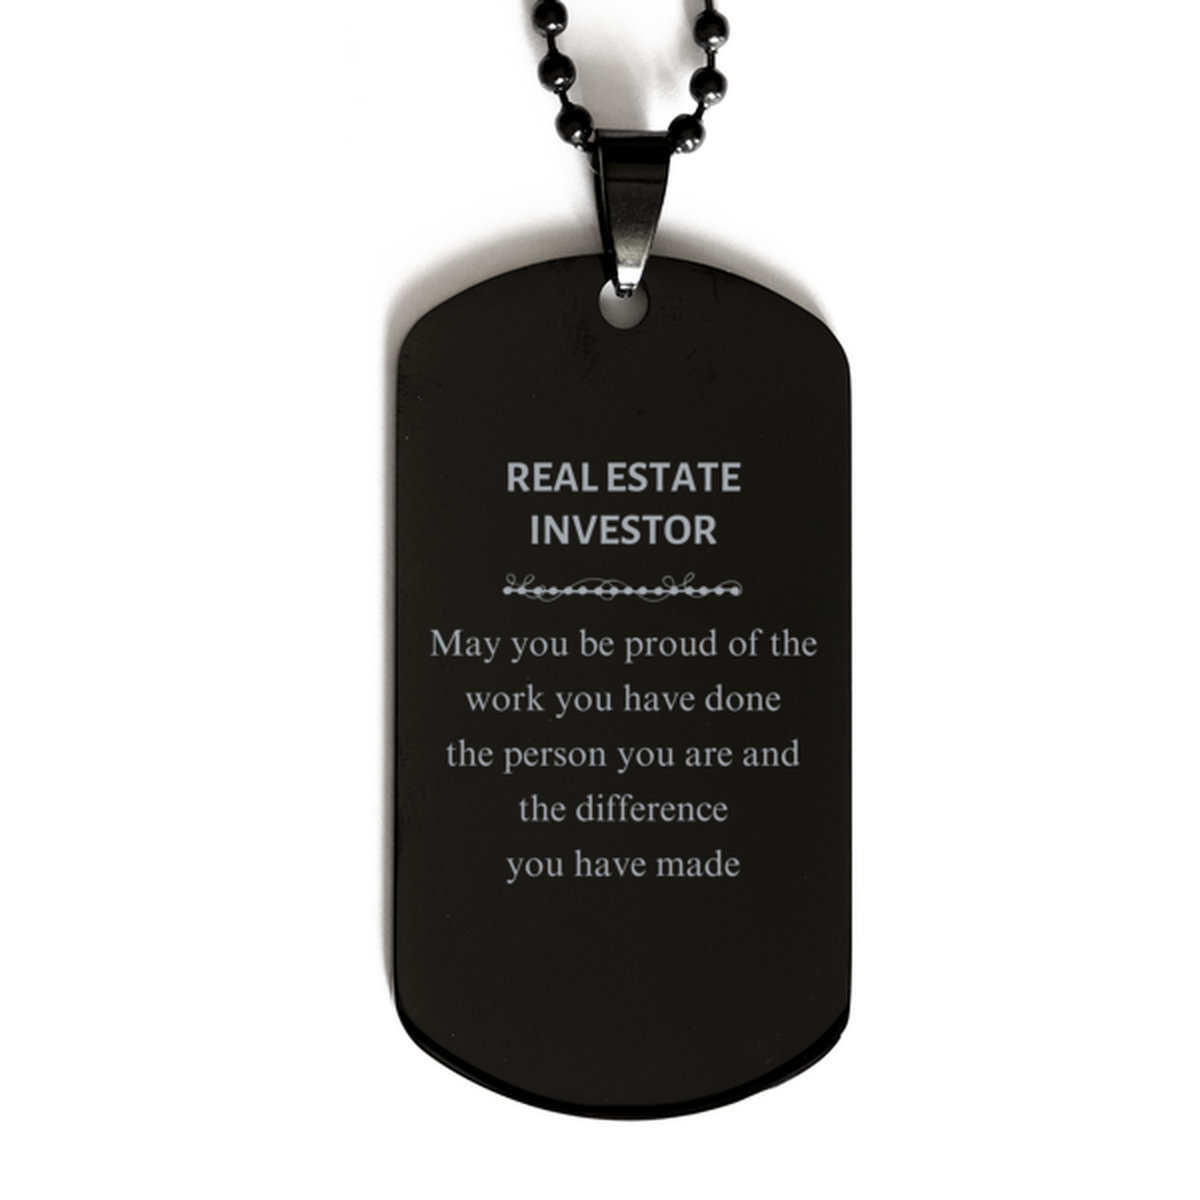 Real Estate Investor May you be proud of the work you have done, Retirement Real Estate Investor Black Dog Tag for Colleague Appreciation Gifts Amazing for Real Estate Investor